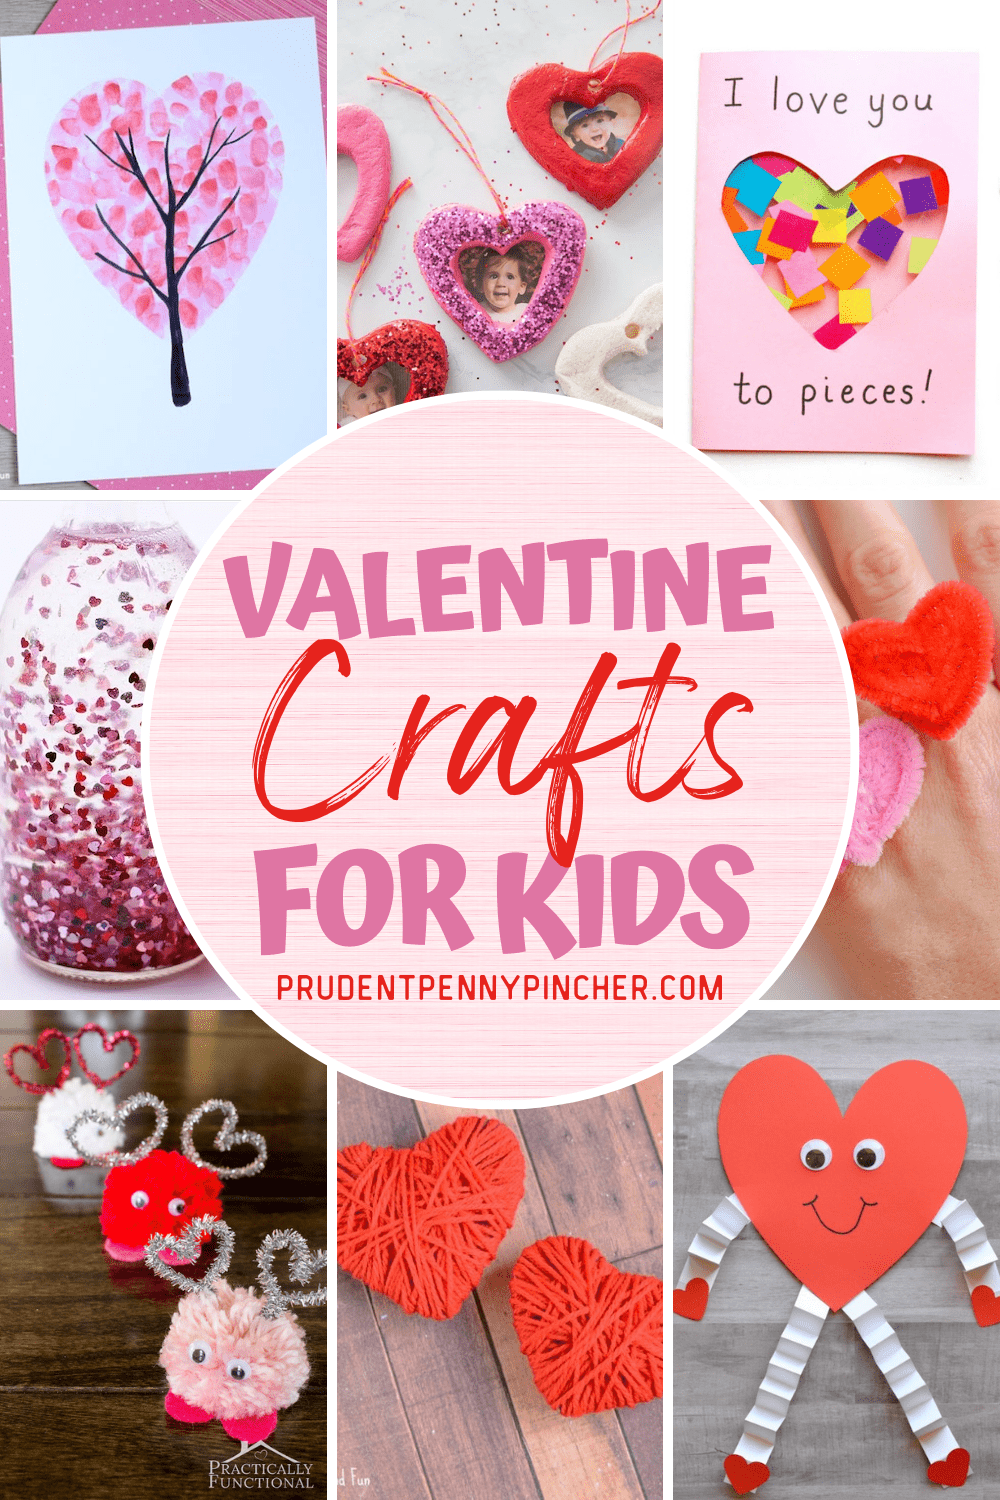 20 Valentine's Day Crafts & Handmade Gifts For Adults To Make